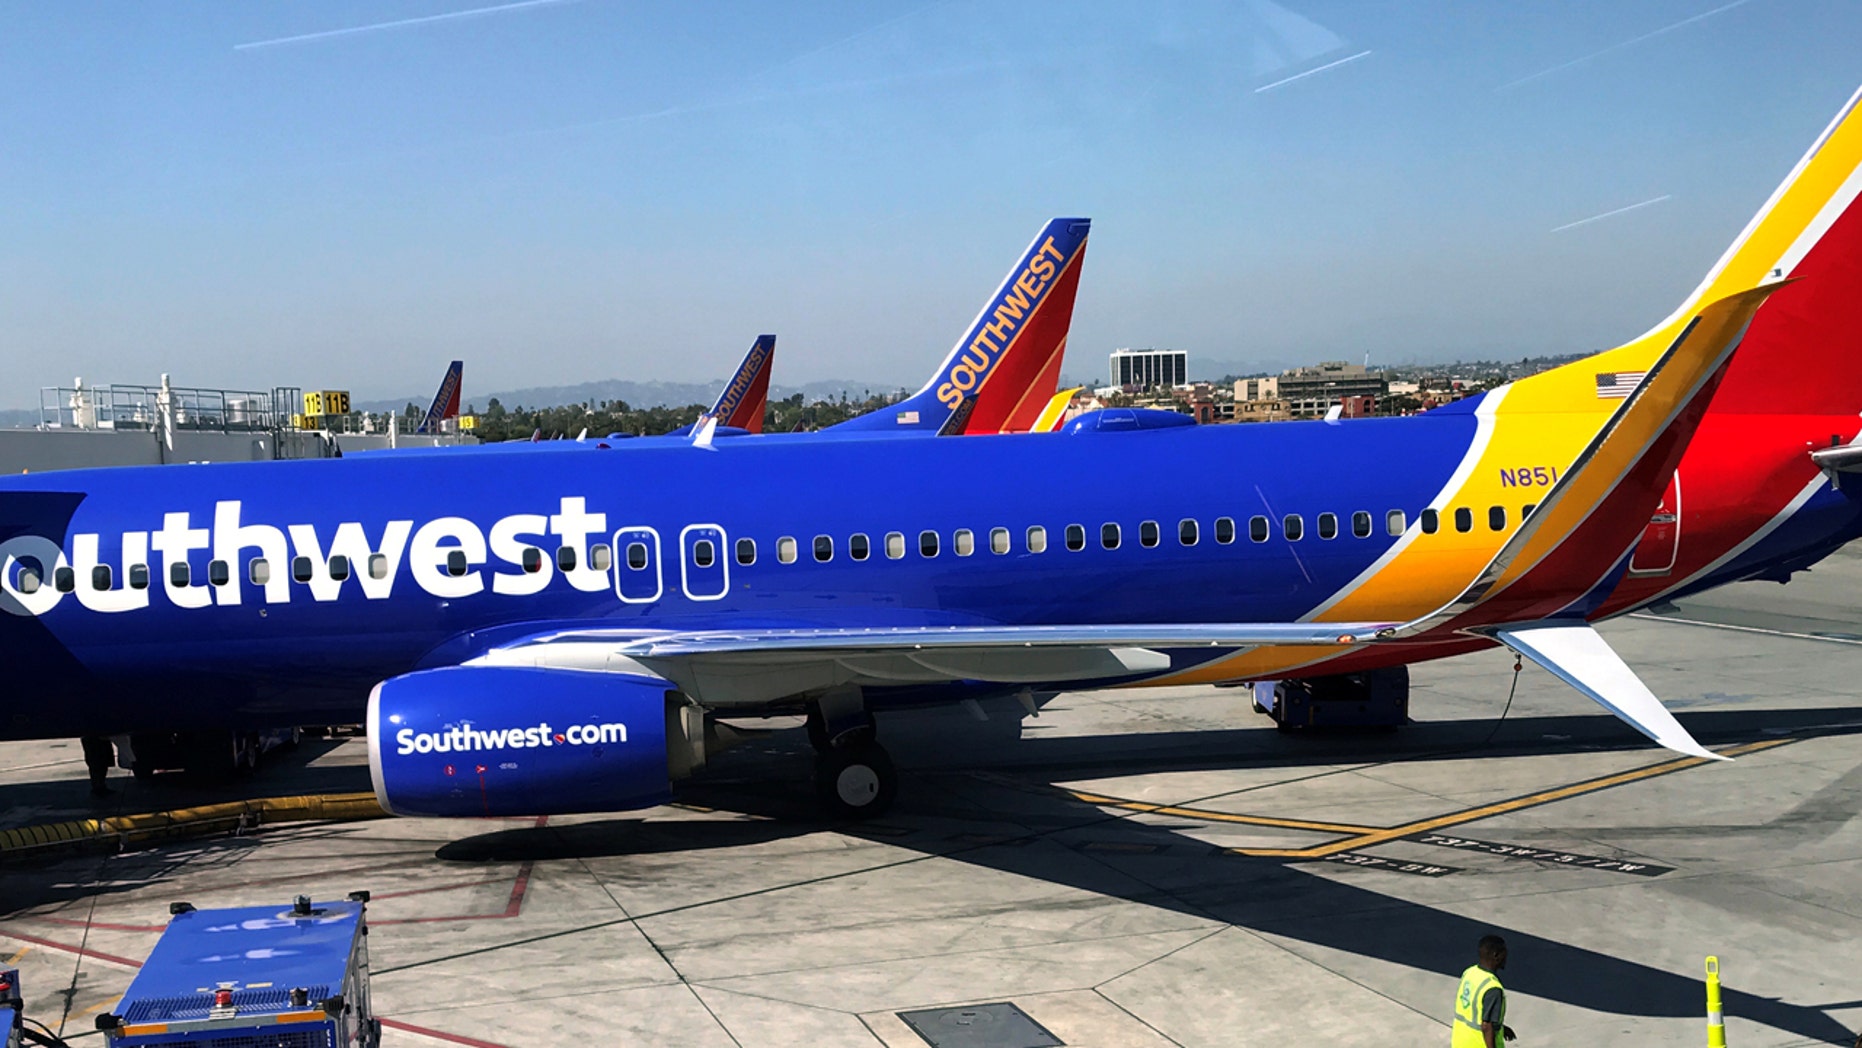 Gay couple claim Southwest denied them family boarding privileges | Fox News